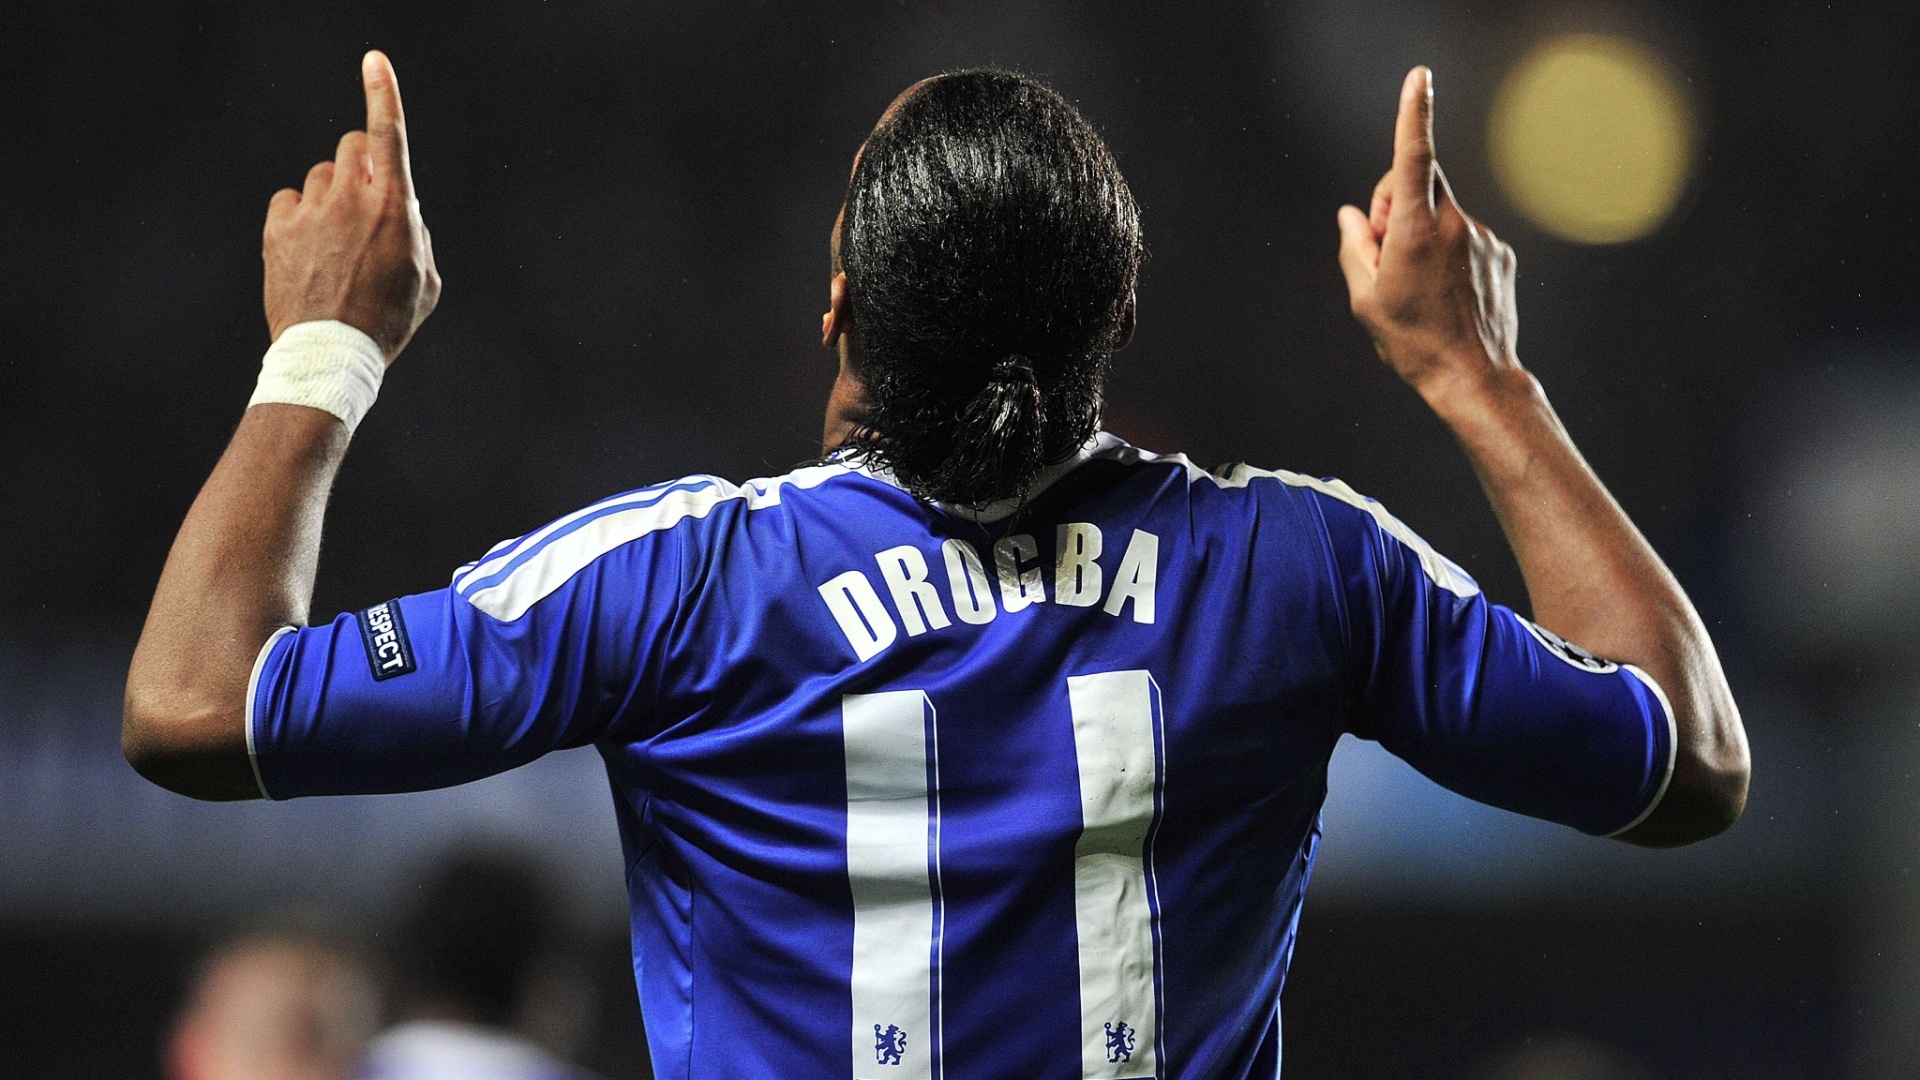 Drogba: Football legend, Played for the Ivory Coast national team. 1920x1080 Full HD Wallpaper.